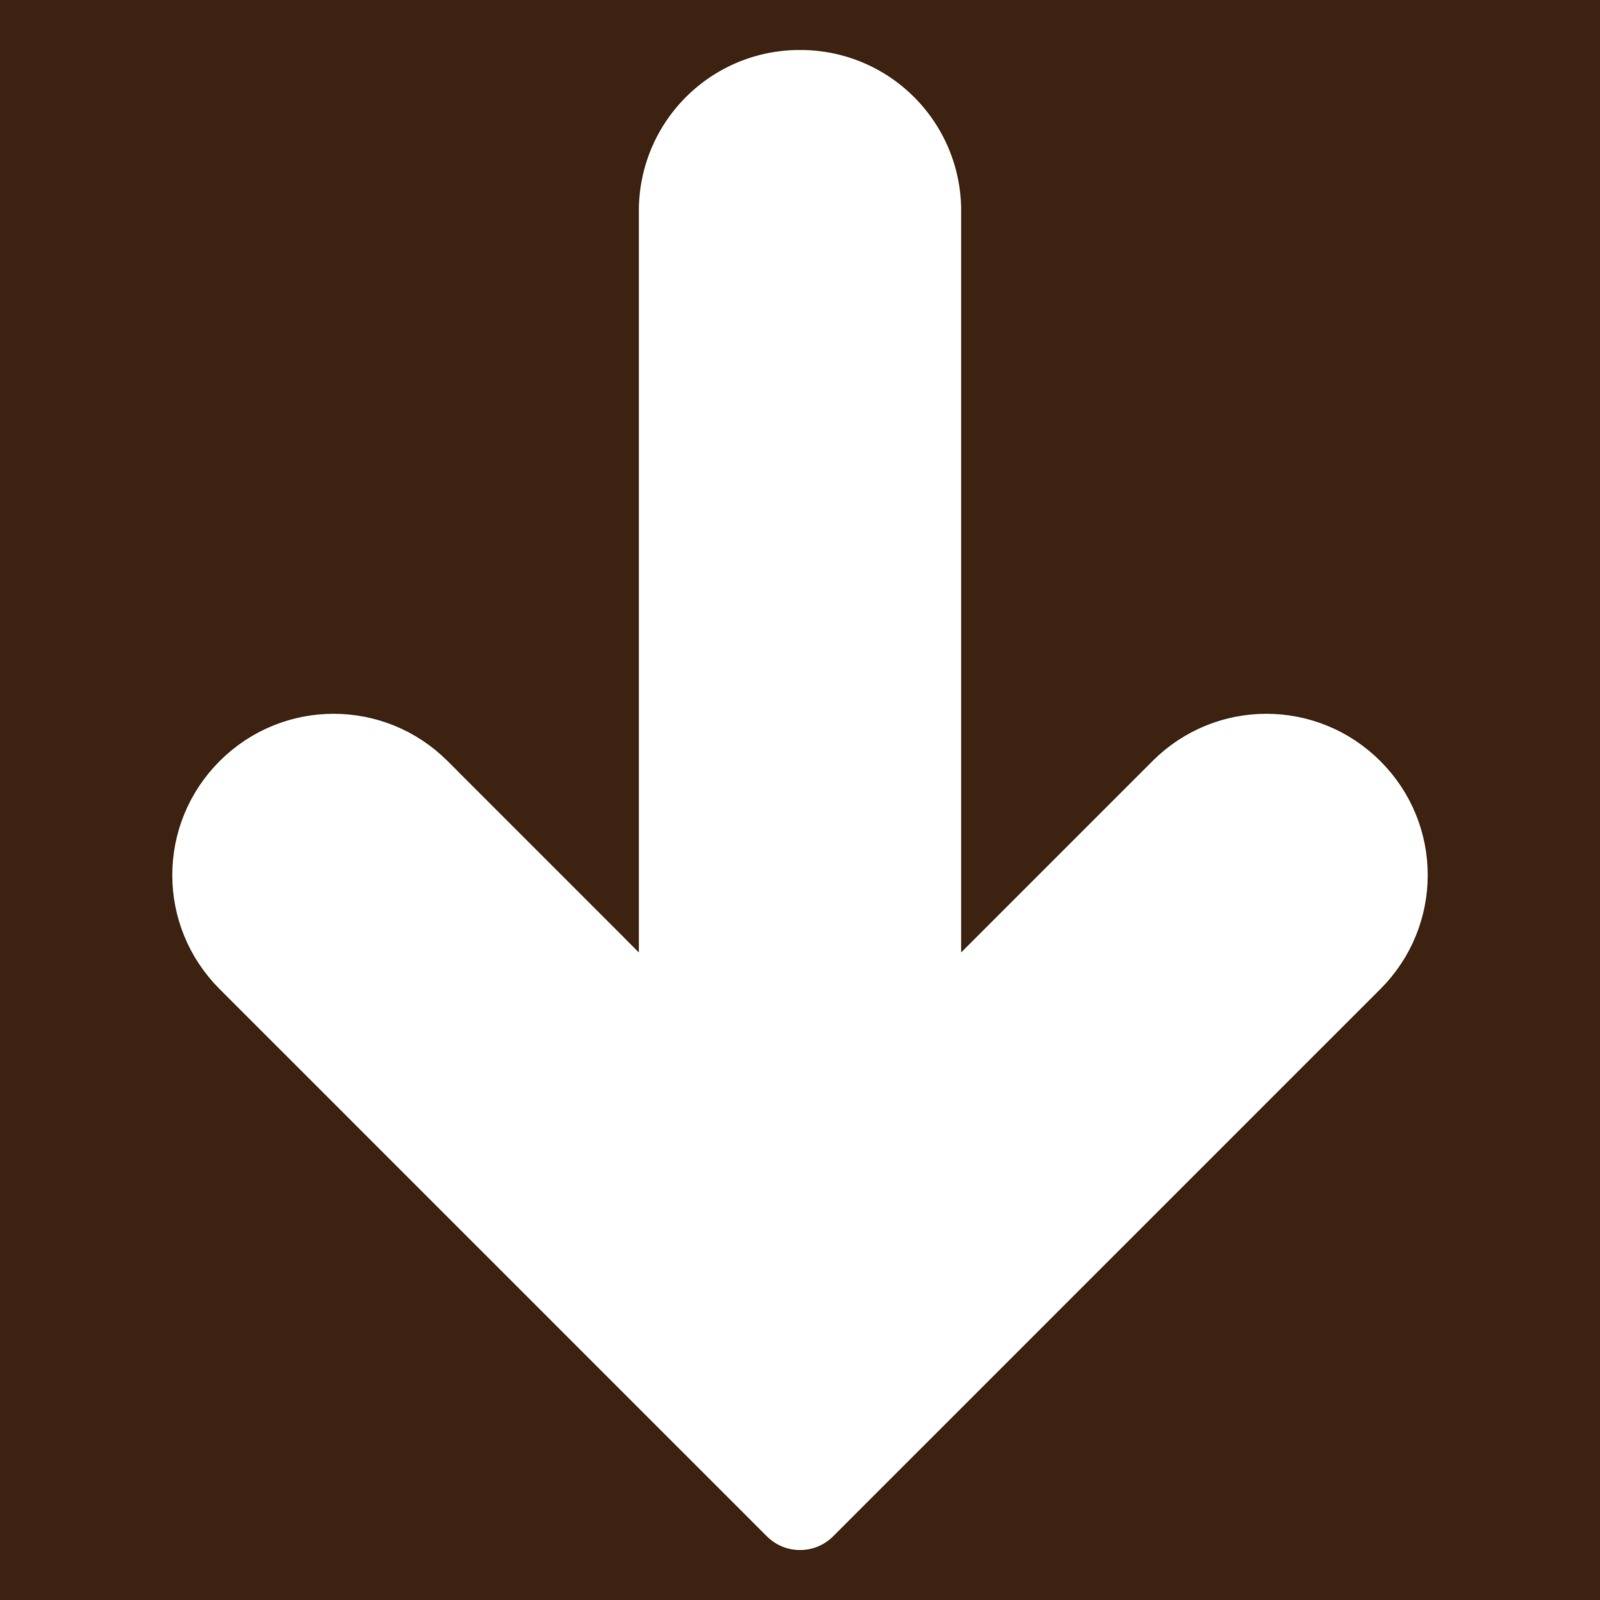 Arrow Down icon from Primitive Set. This isolated flat symbol is drawn with white color on a brown background, angles are rounded.